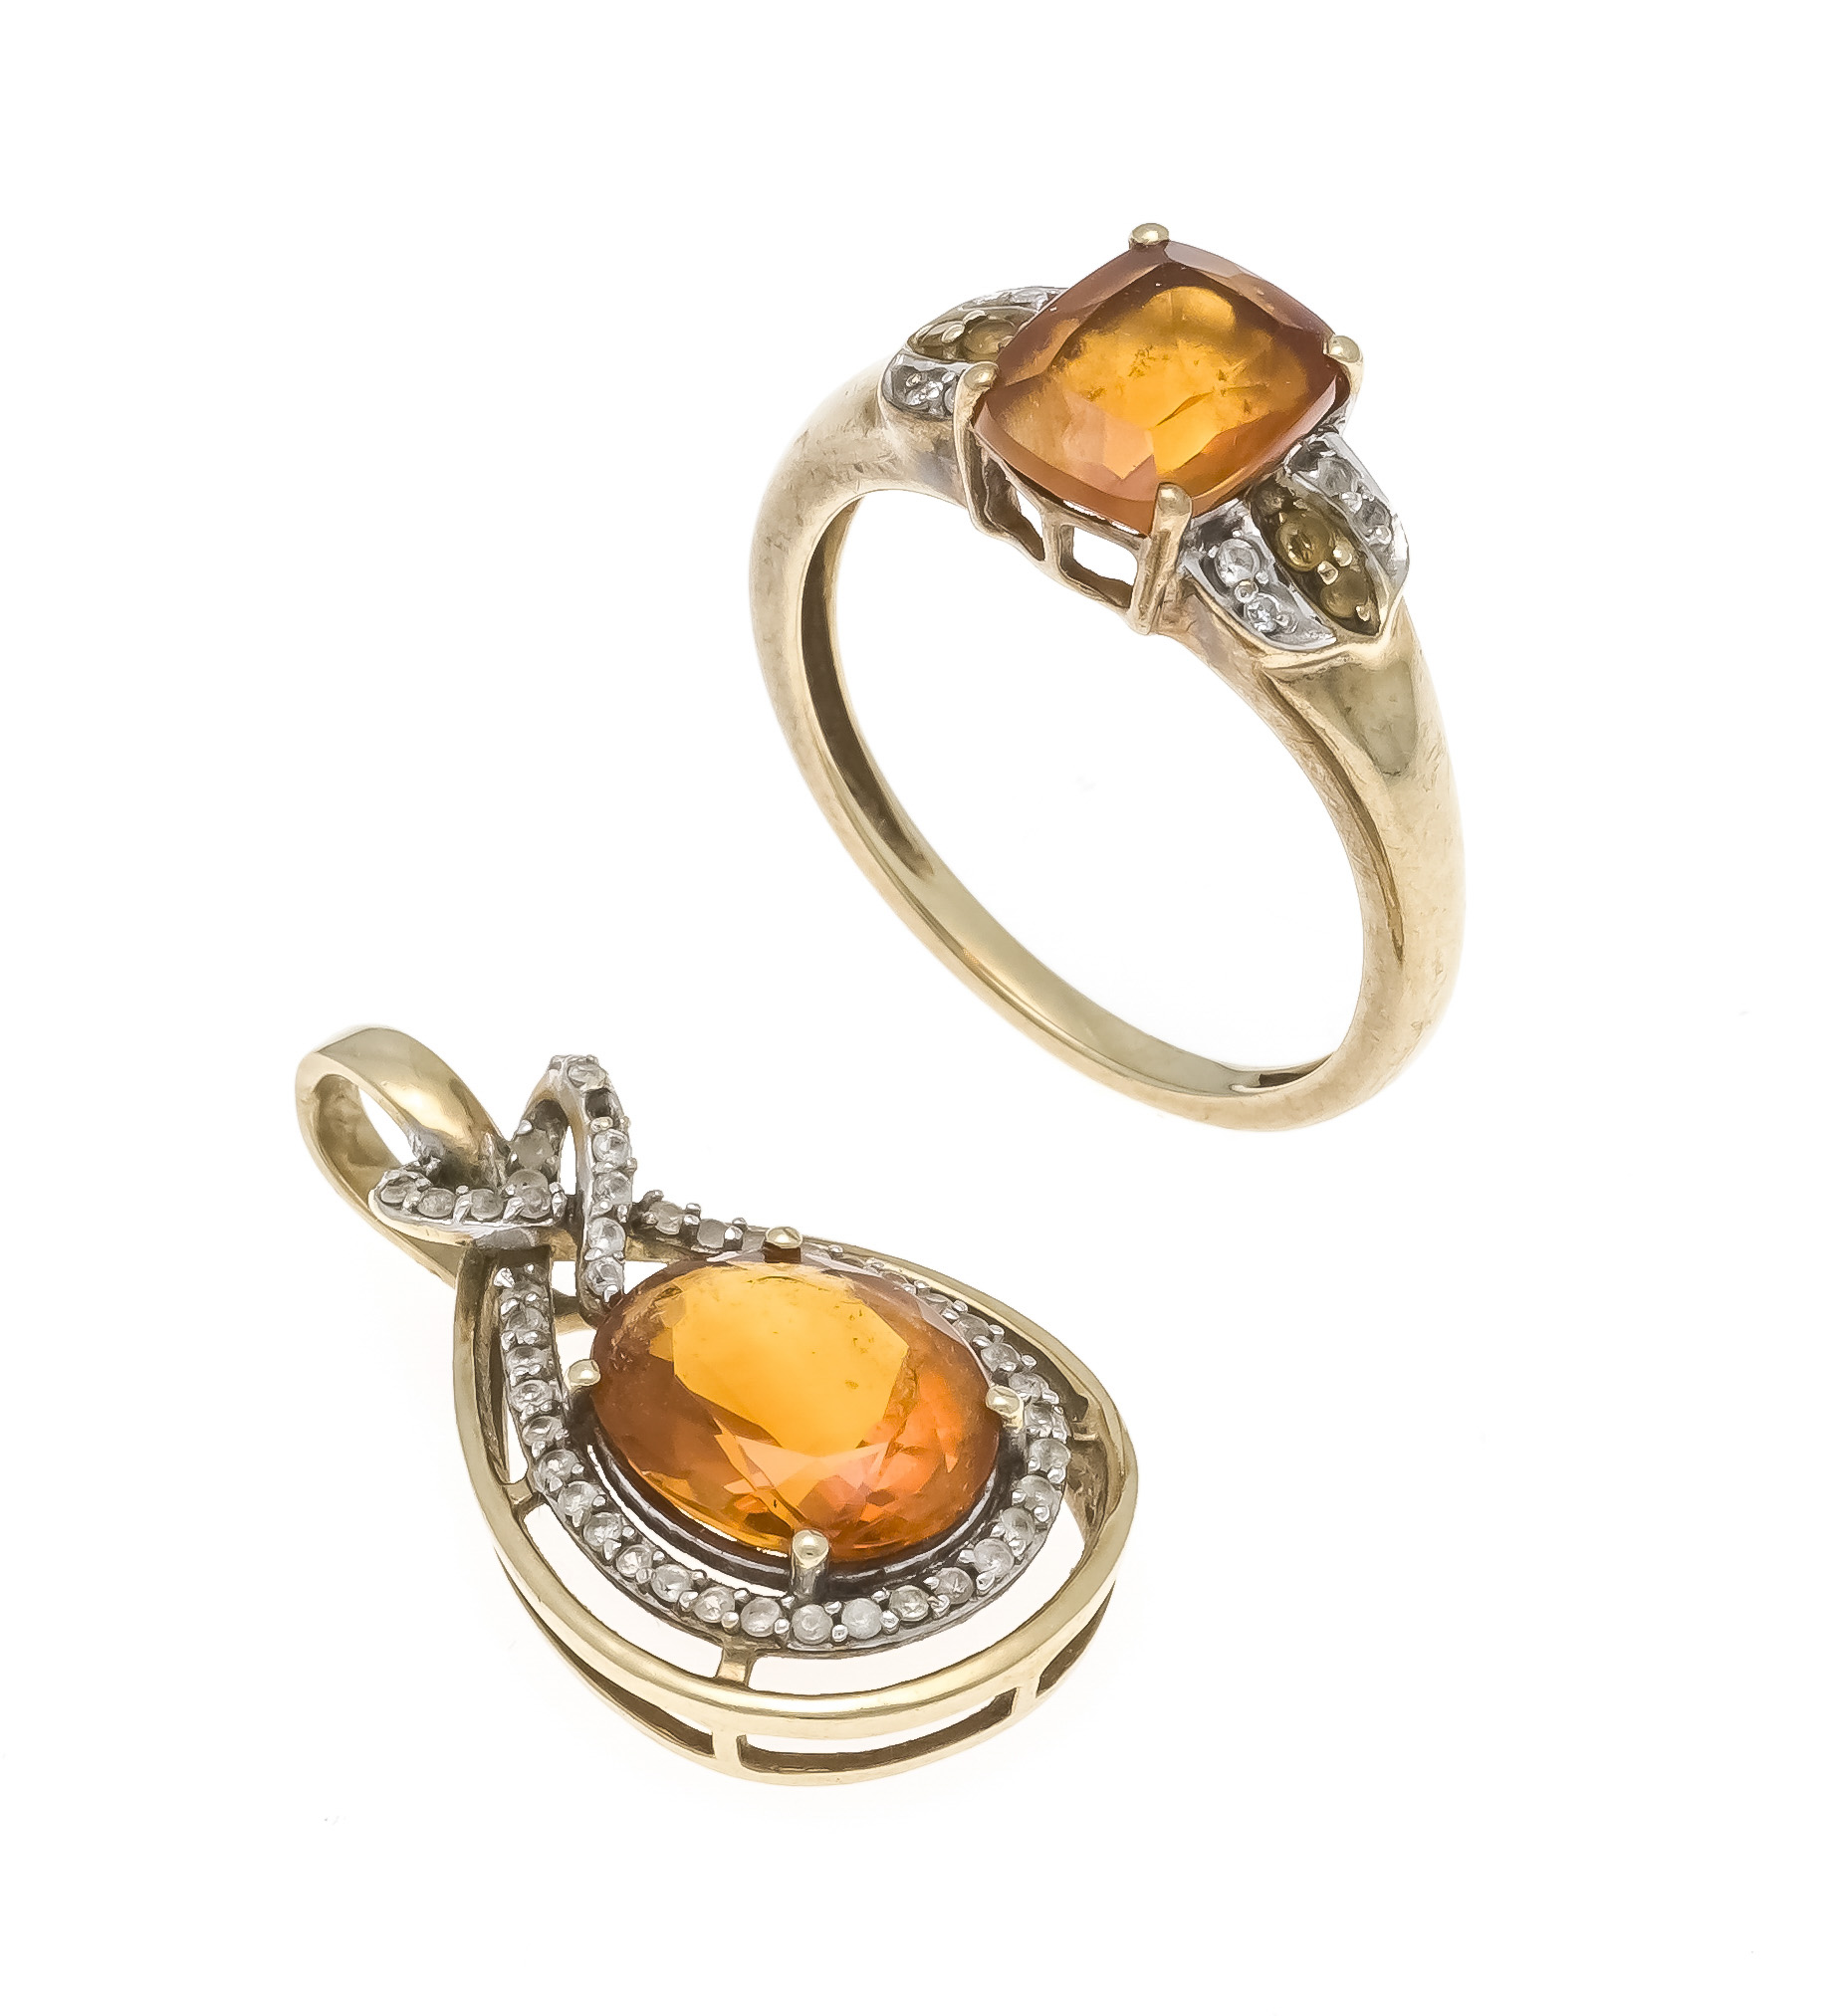 2-piece citrine set GG/WG 375/000 with 2 oval faceted Madeira citrines 11.0 x 9.0 and 8.9 x 7.1 mm